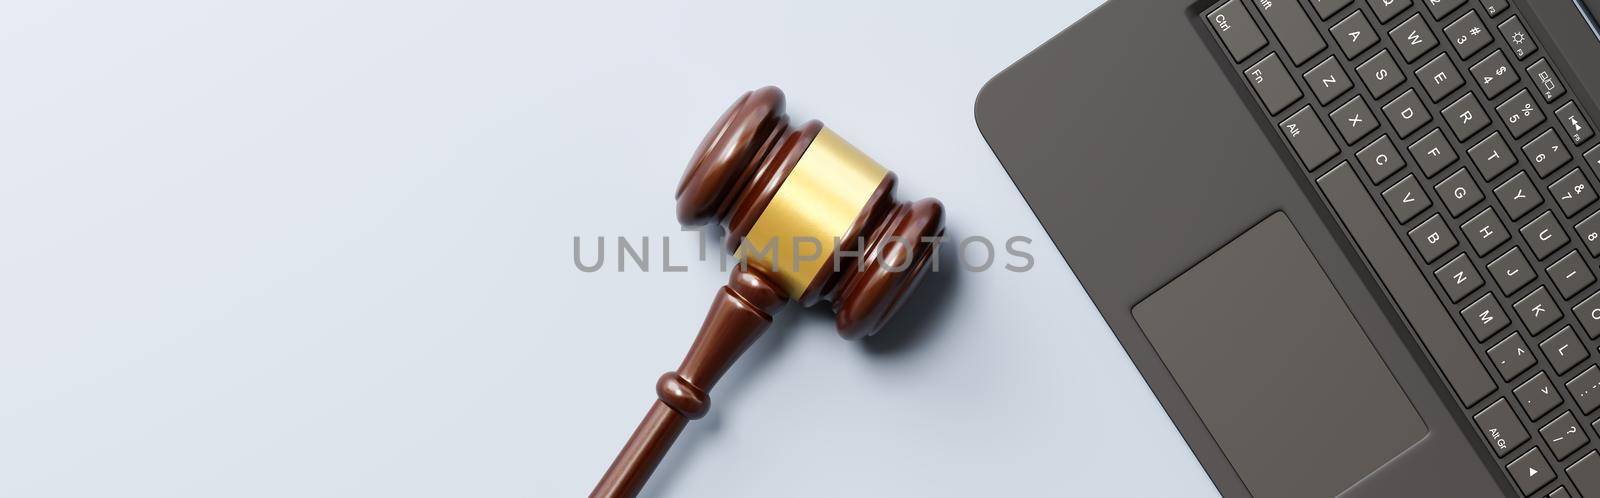 Judge's Gavel and Laptop Computer on Gray Background with Copy Space by make